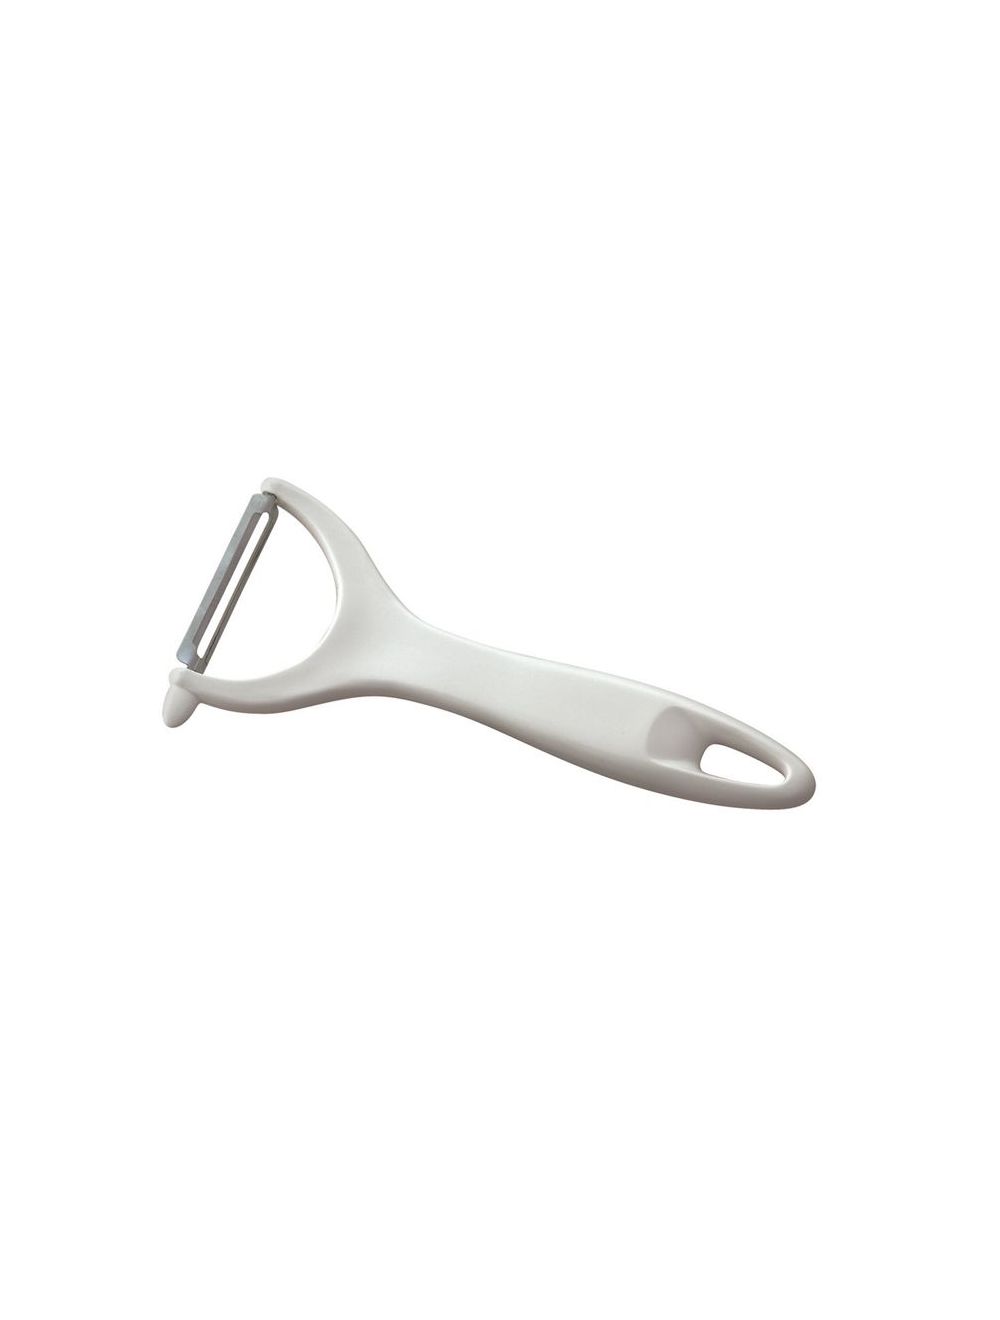 Peeler with Lateral Blade Presto